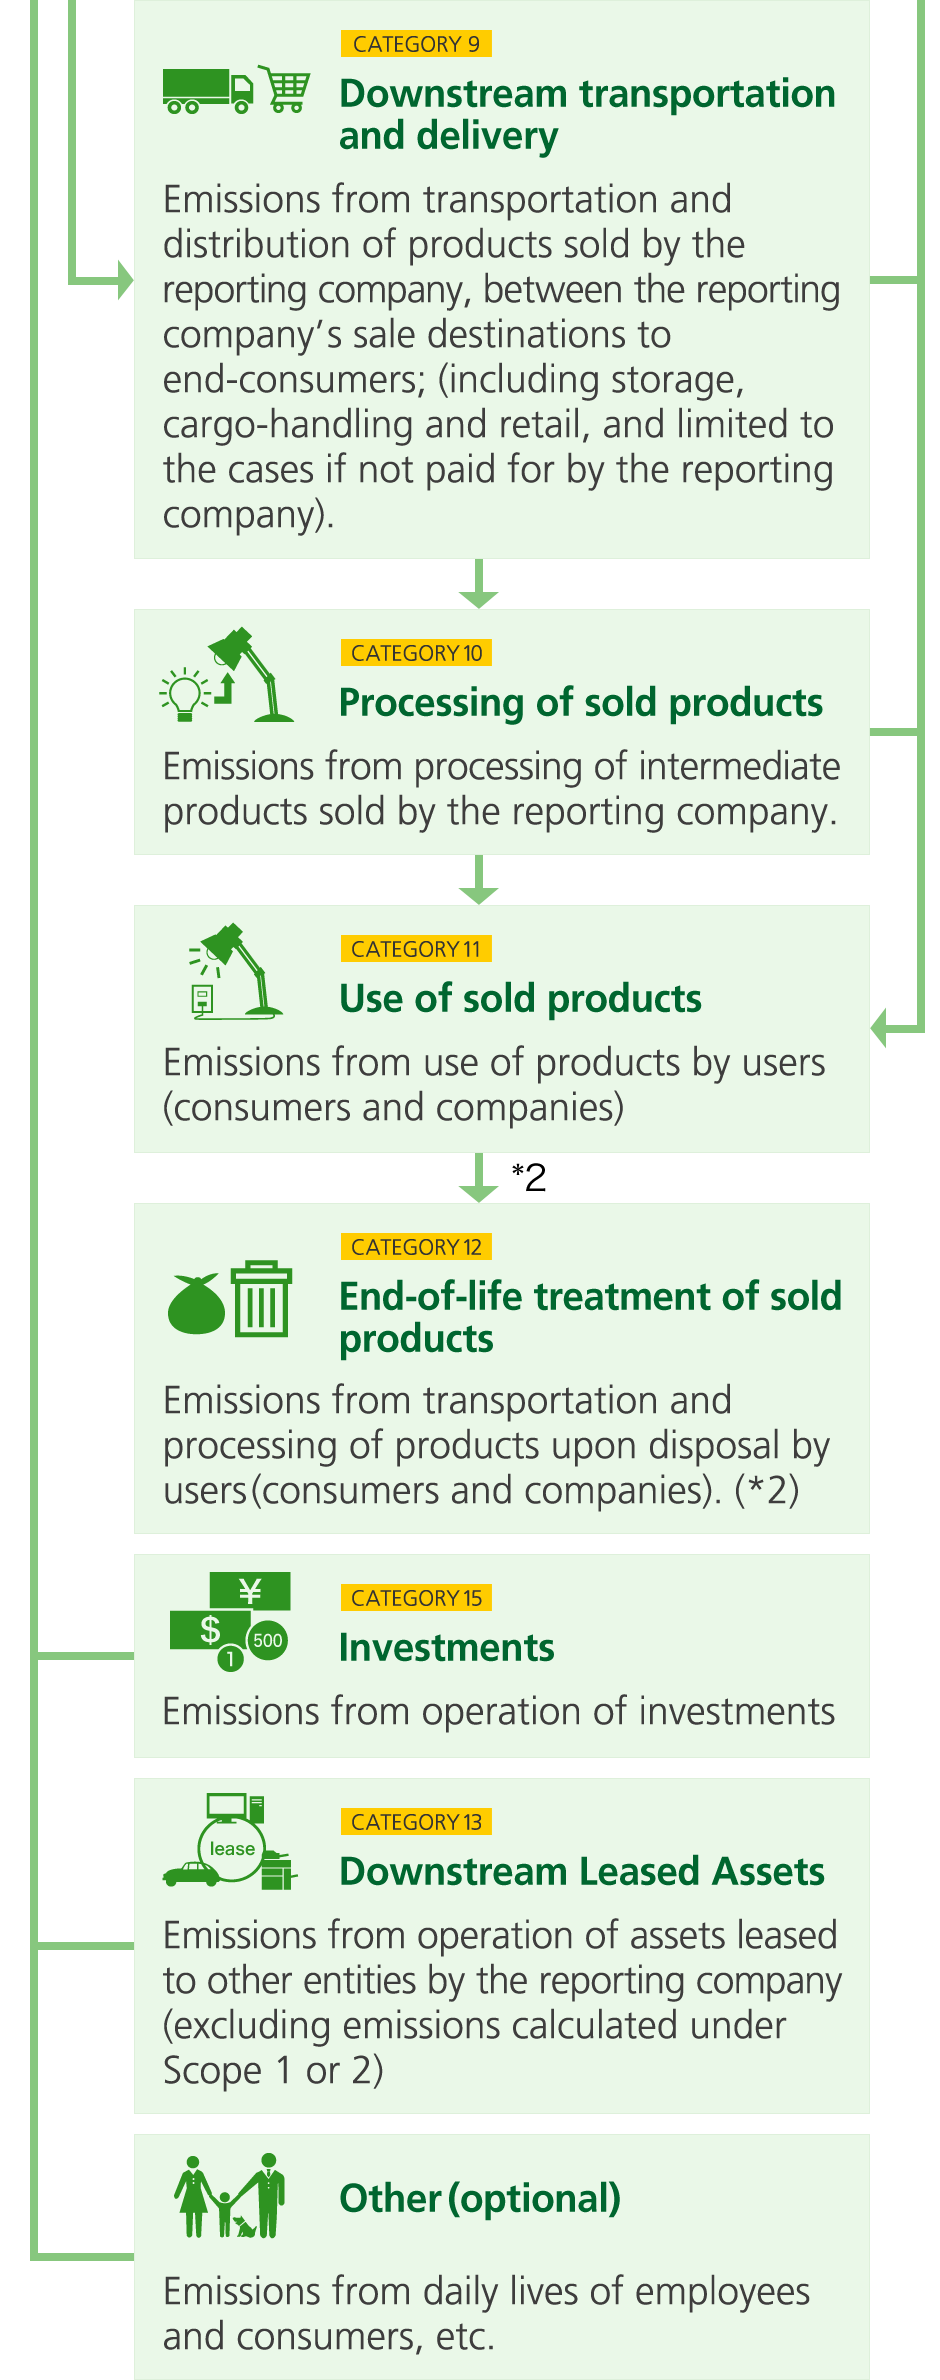 The Ministry of the Environment, Japan Japan “Supply-chain emissions”